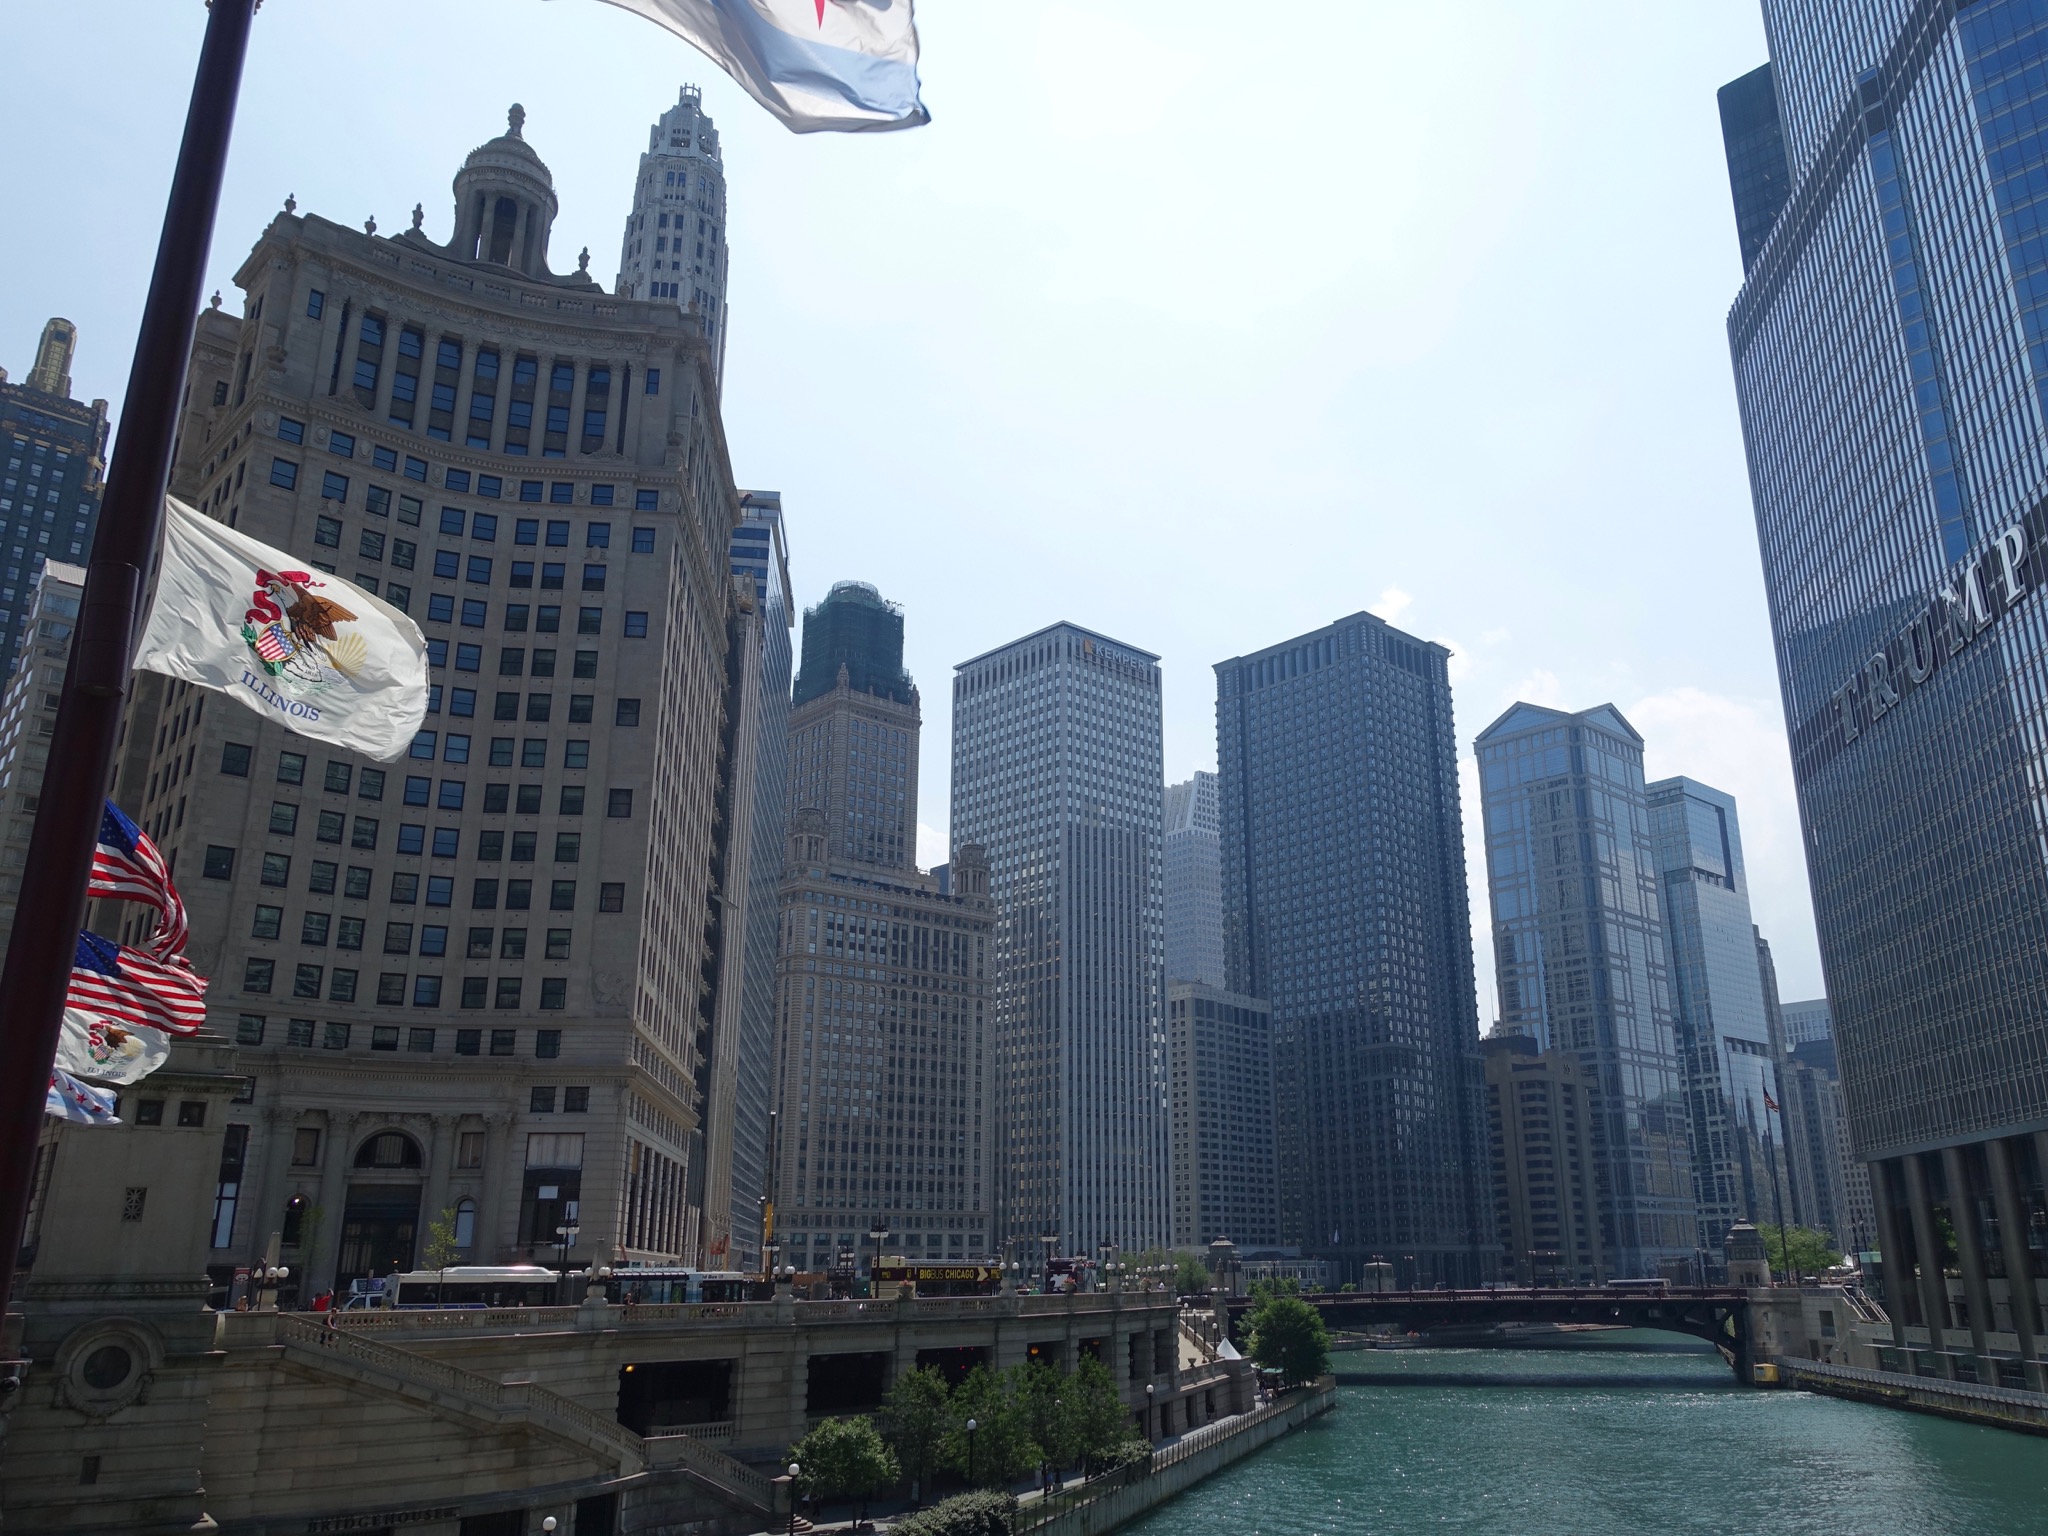 Photo 23 of 135 from the album Highlights Chicago 2015.